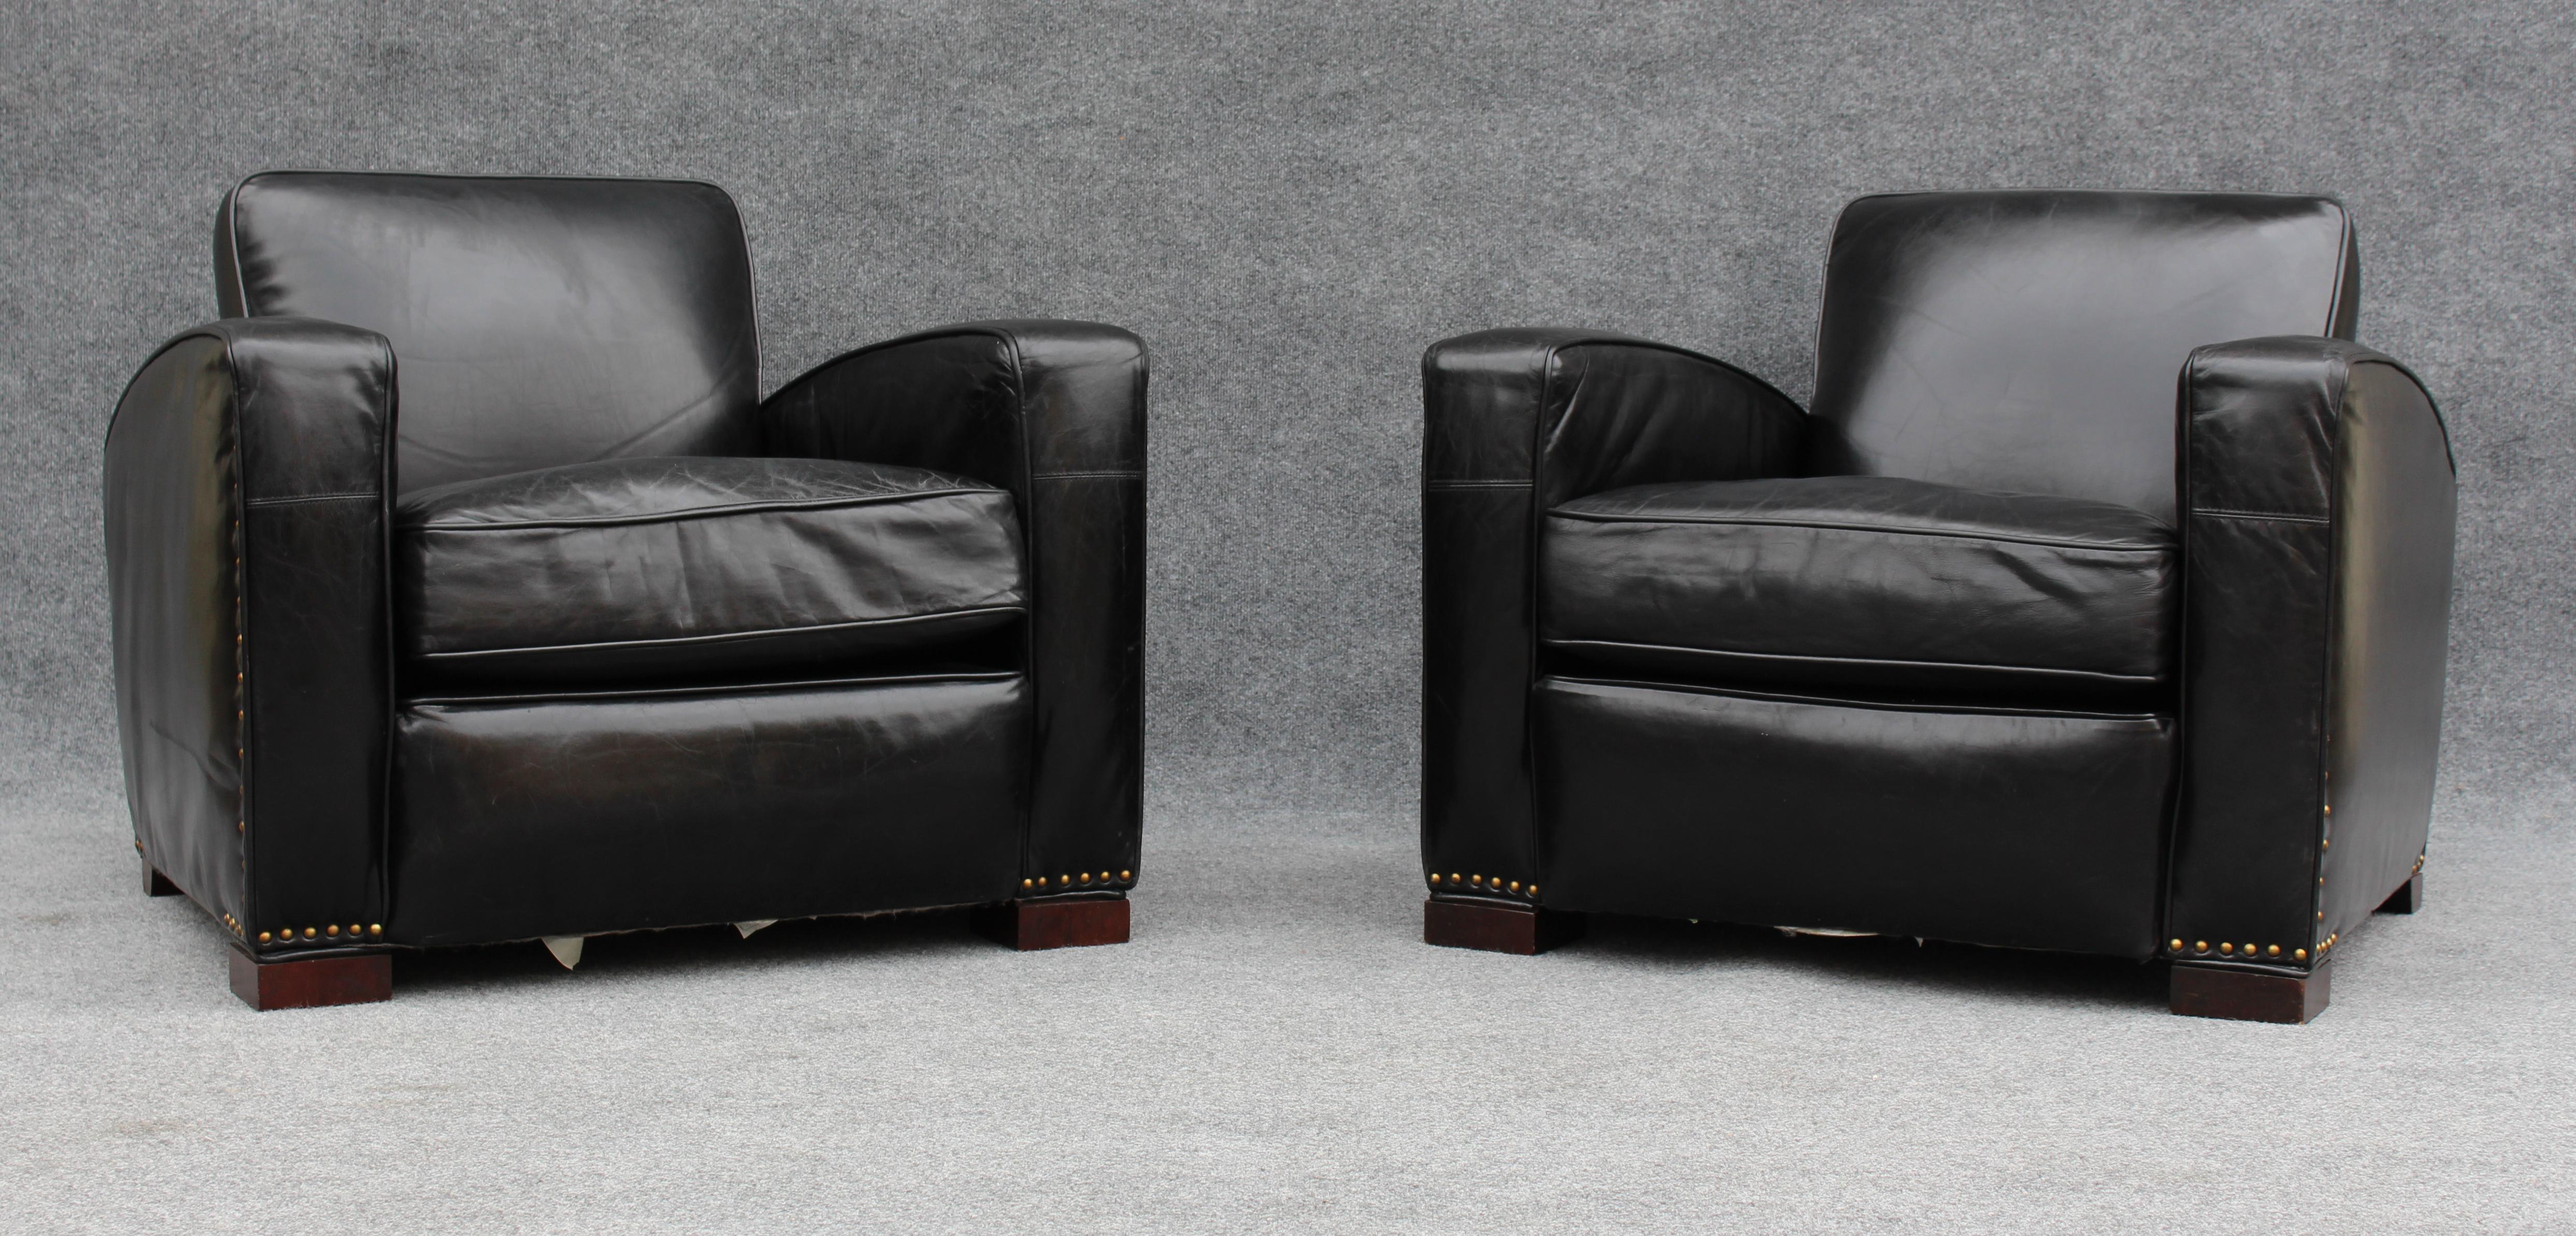 Reminiscent of chairs found in the great reading rooms of Europe, this pair of lounge chairs features a sleek curved design with thick arms, backs, and seat cushions. Reinforced from the interior with a hardwood frame, the pair is covered in black